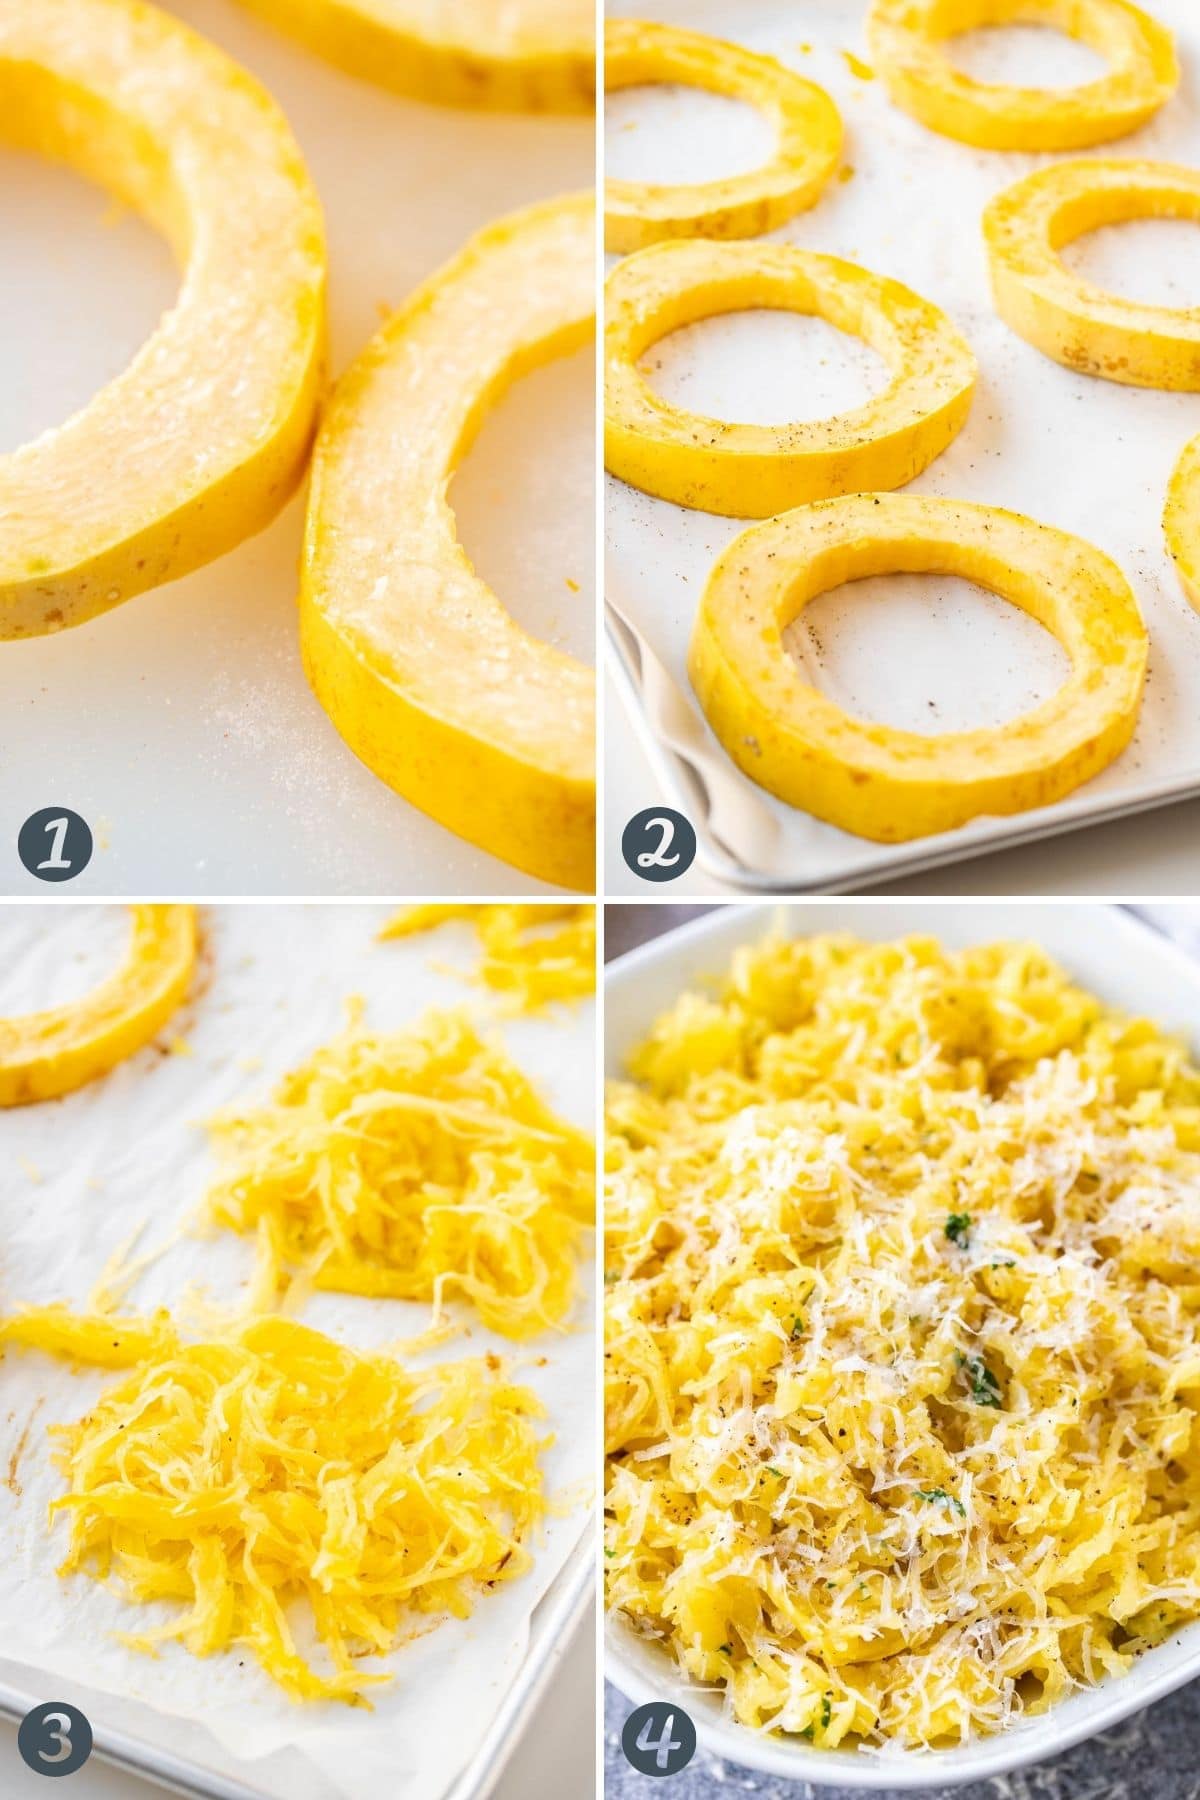 Step by step instructions for how to make roasted spaghetti squash